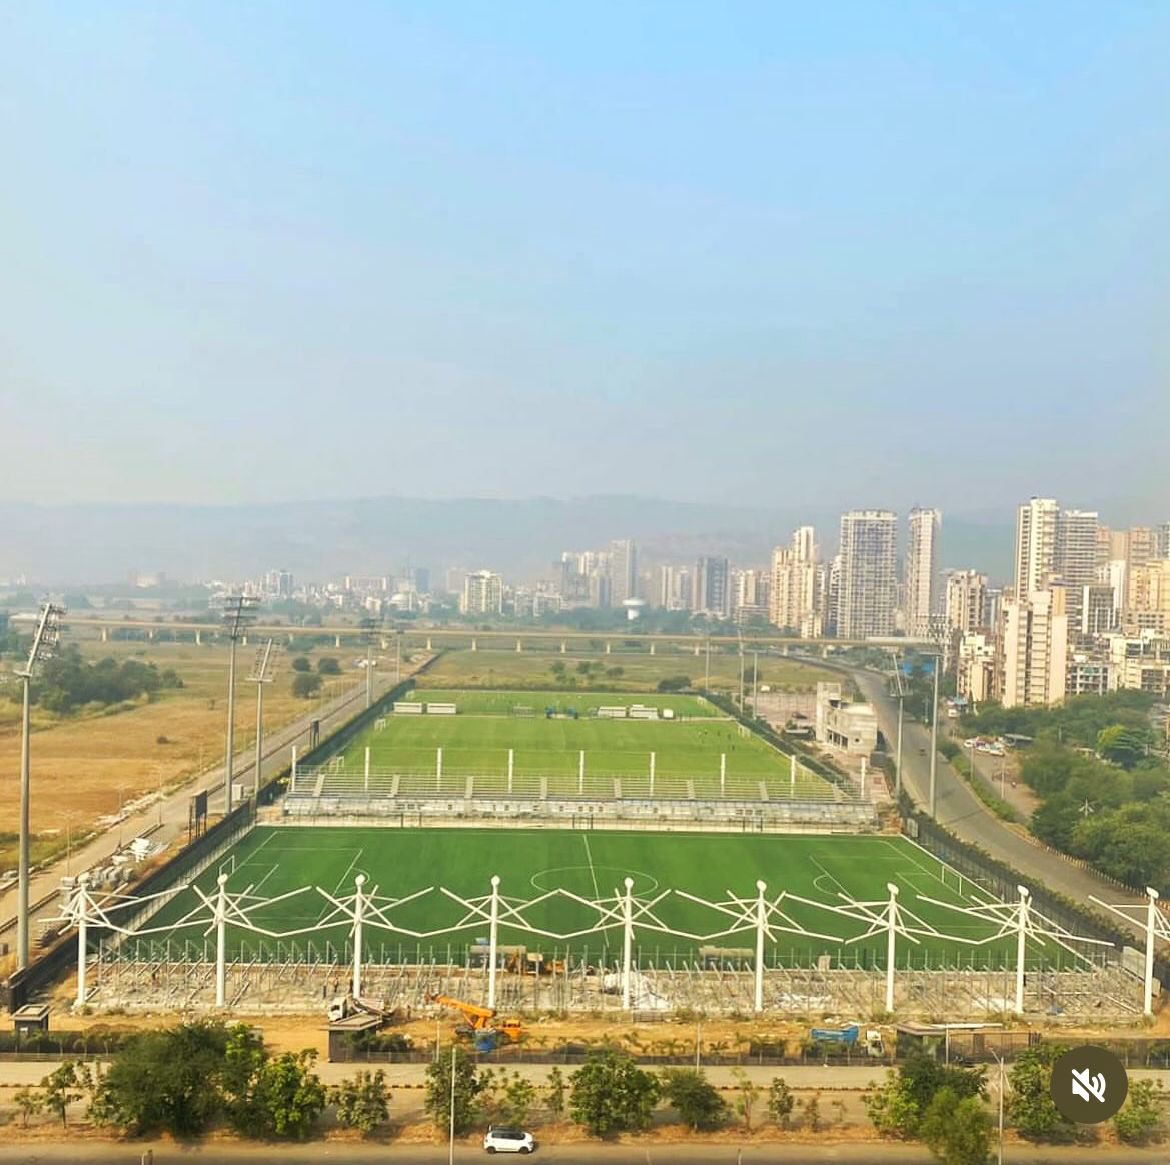 3/7 Heading to Navi Mumbai, Kharghar COE Stadium, Recent updates show it's equipped with 3 practice pitches and a mini stadium. These were recently used for i-league 2 matches. Putting these facilities to use it can elevate the game experience! #DurandCup